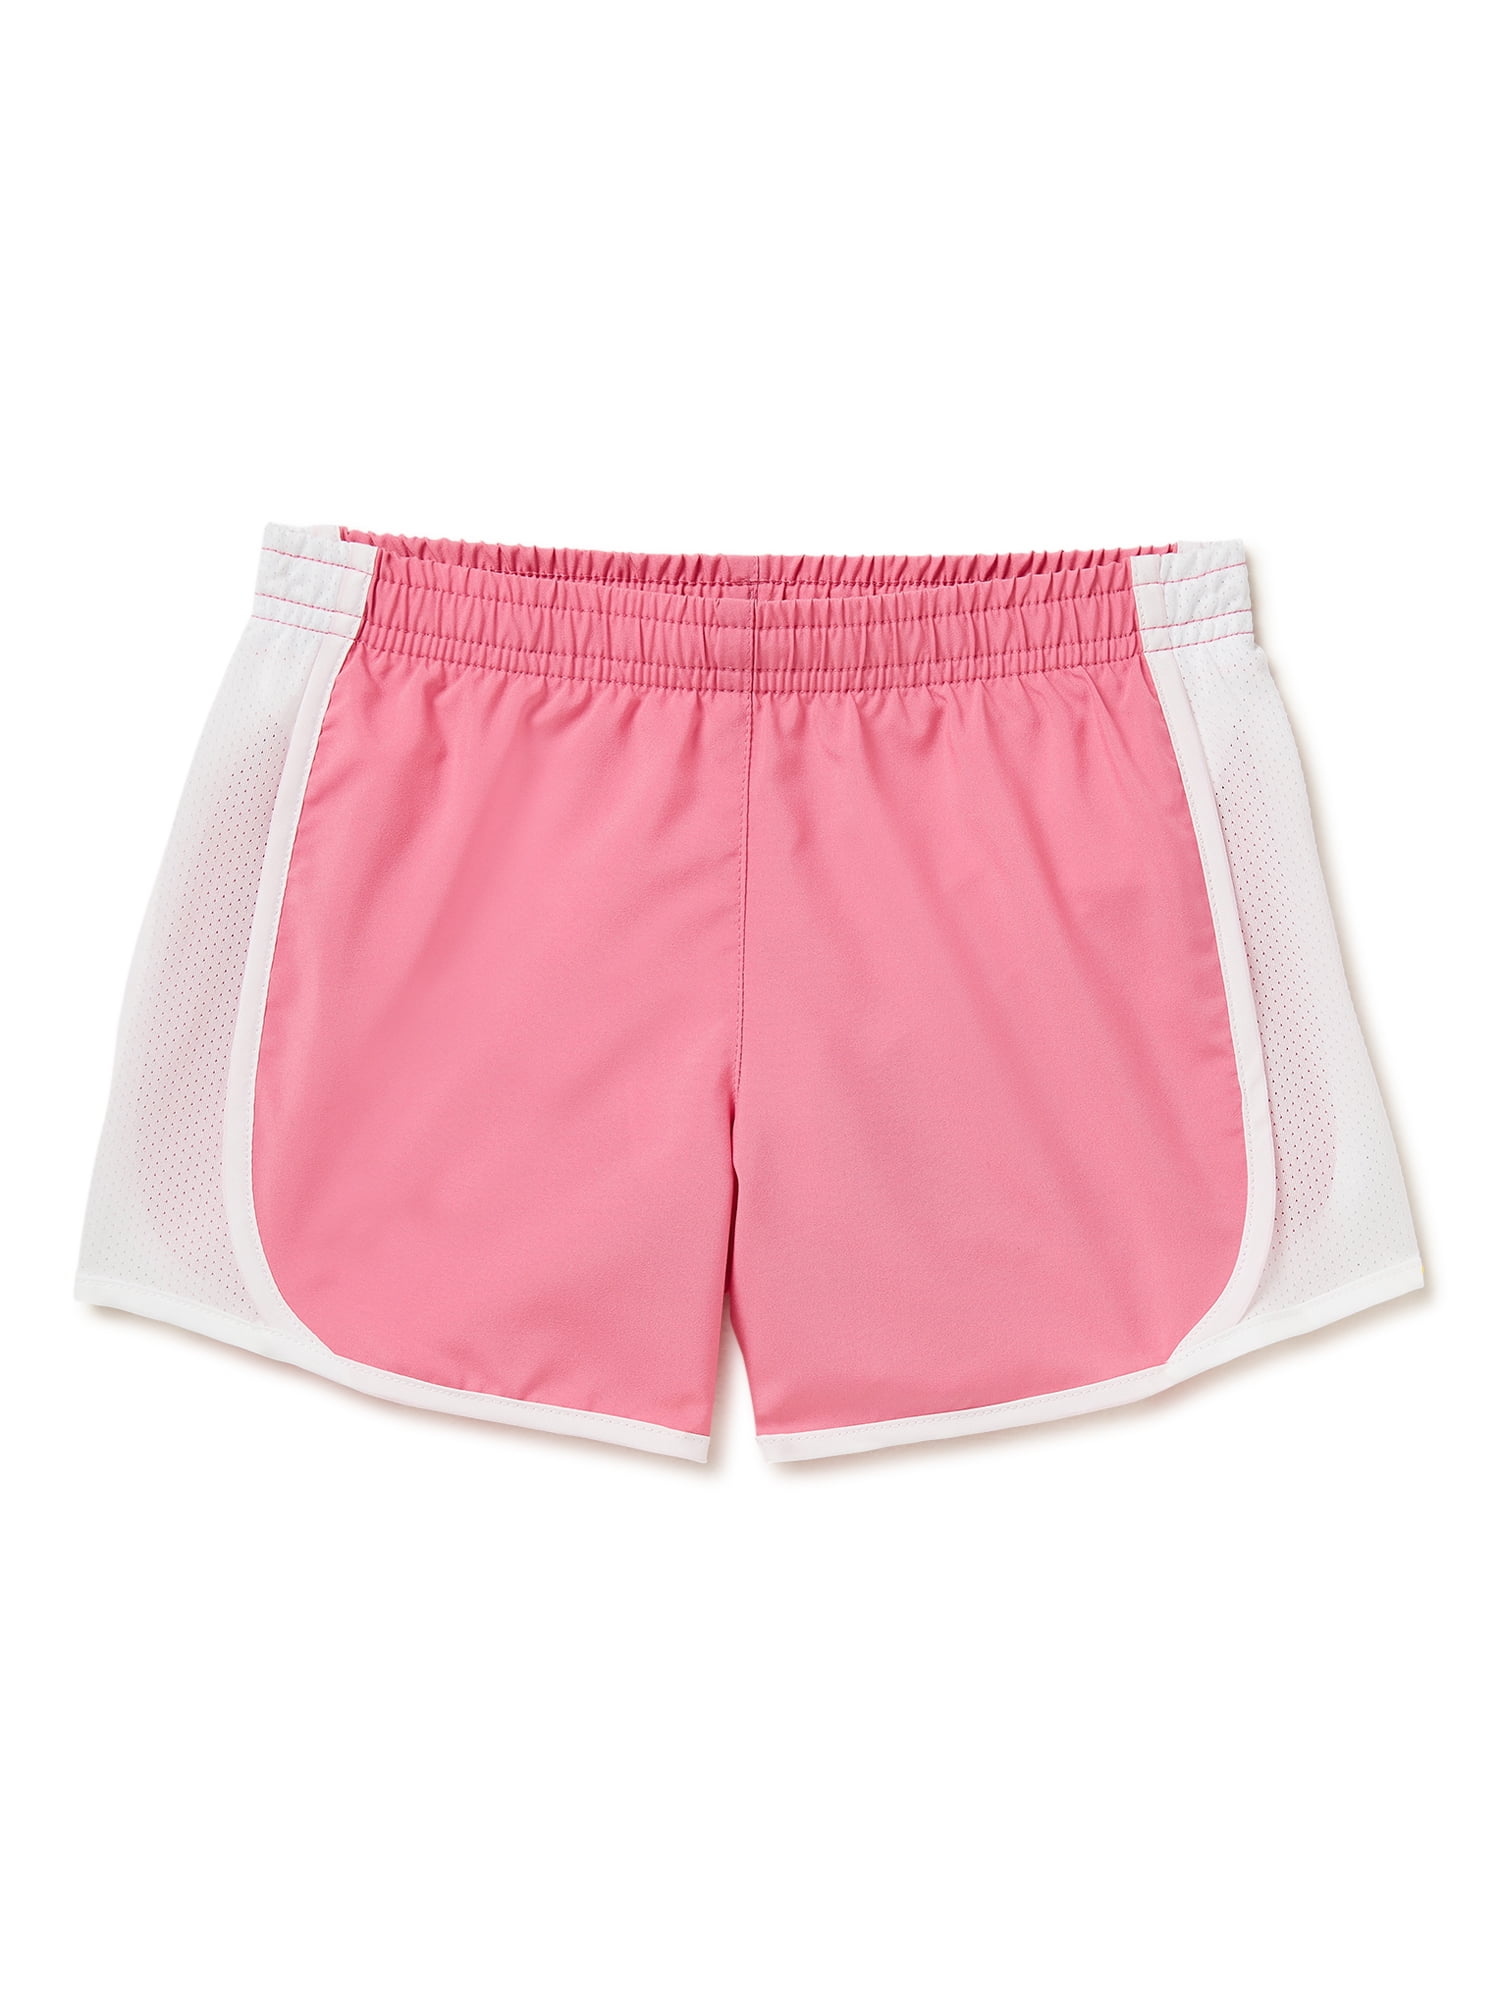 Athletic Works Girls Running Shorts Sizes 4 18 And Plus